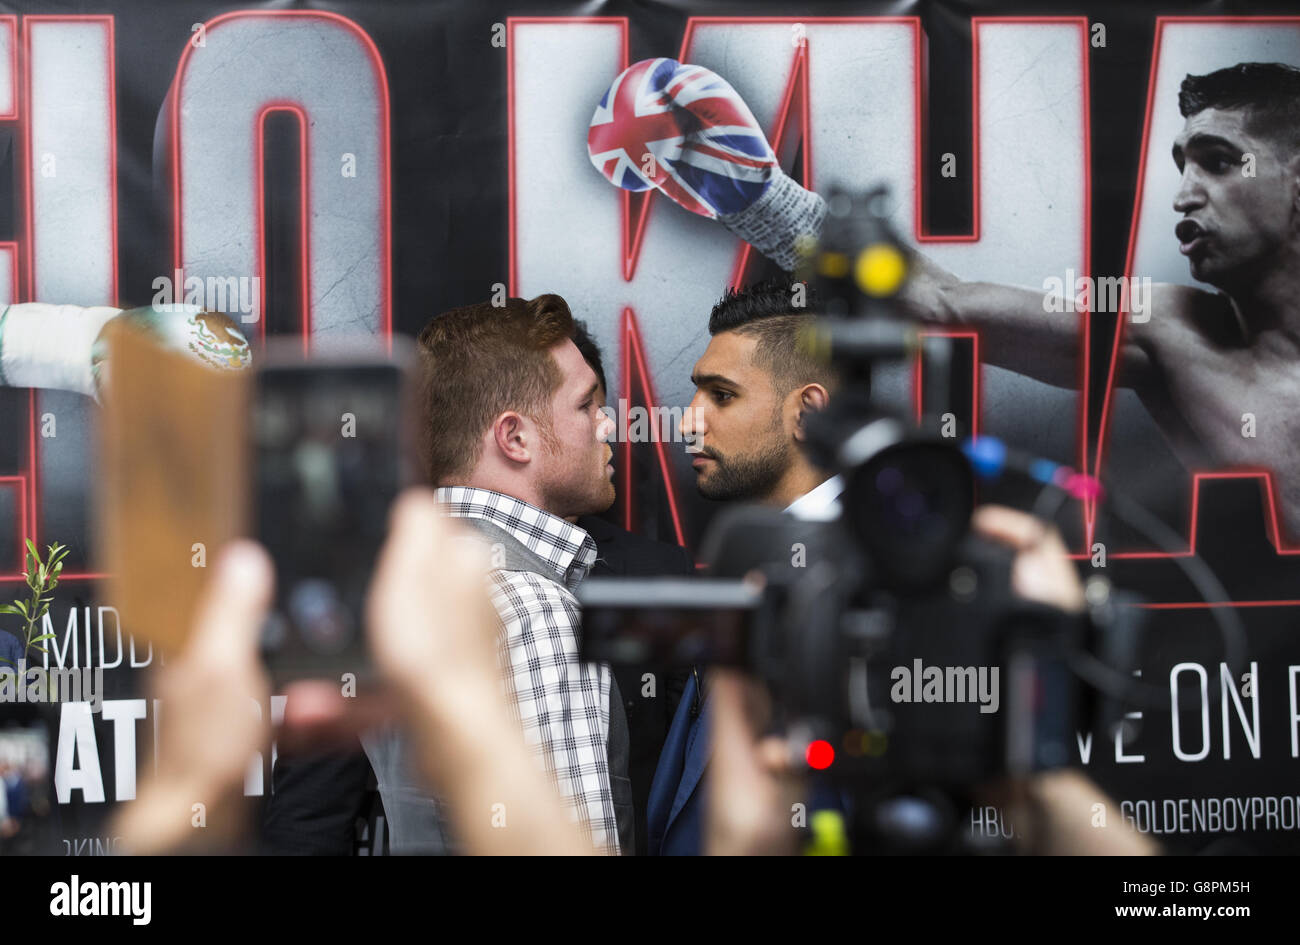 Saul Alvarez (left) and Amir Khan (right) during a press conference at the Park Plaza Riverbank London. PRESS ASSOCIATION Photo. Picture date: Monday February 29, 2016. See PA story BOXING London. Photo credit should read: John Walton/PA Wire. Stock Photo